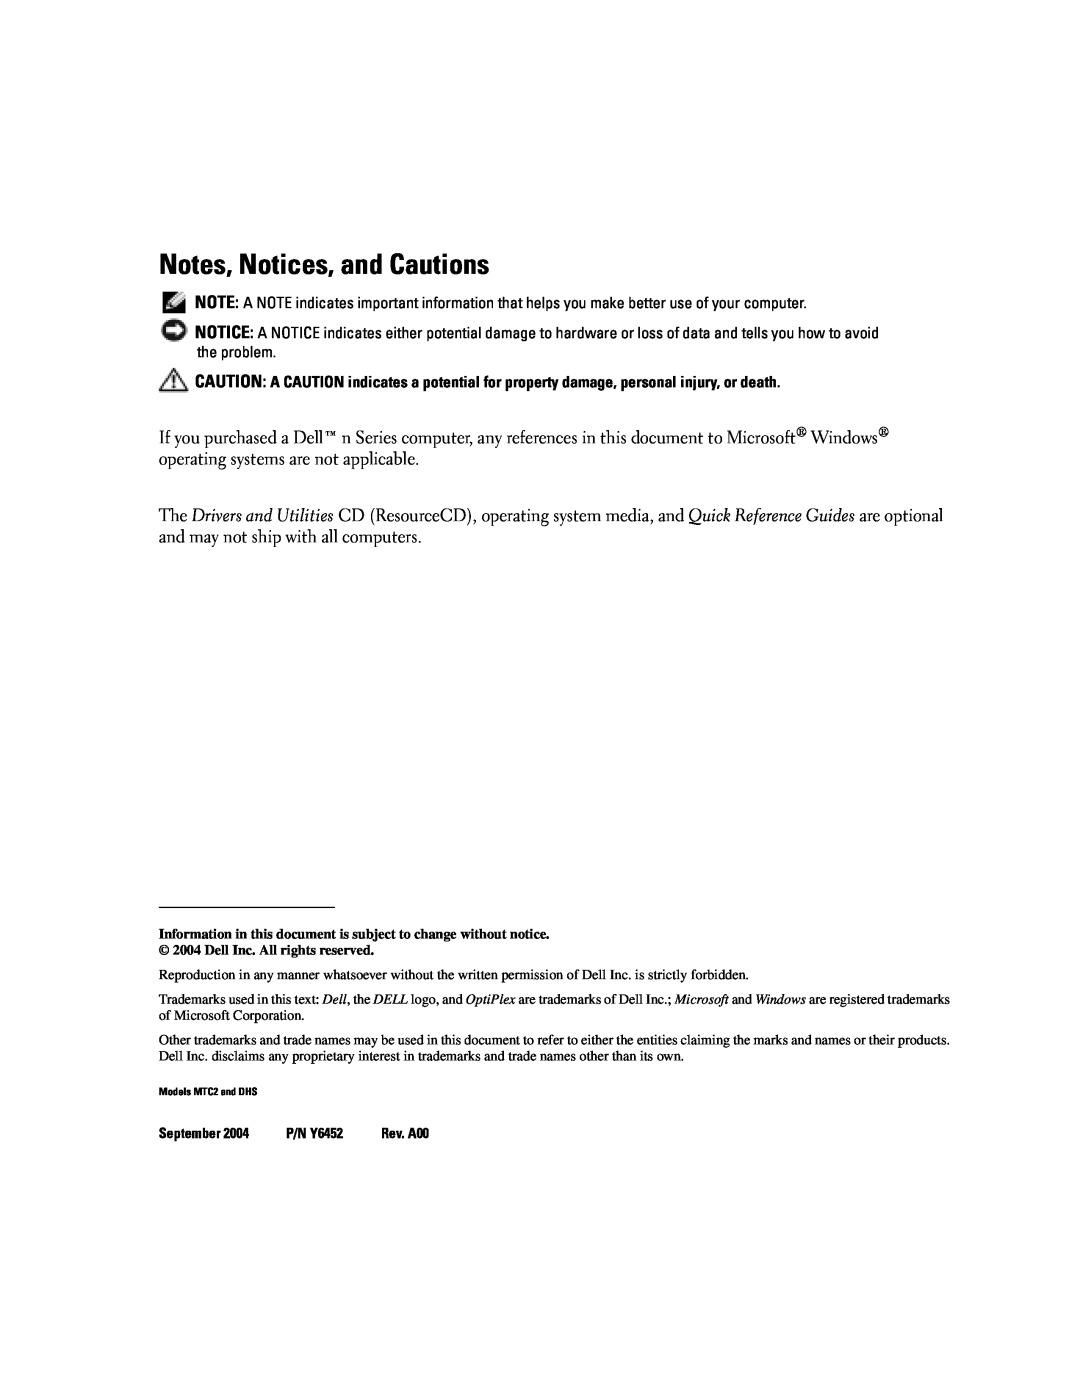 Dell manual Notes, Notices, and Cautions, September, P/N Y6452 